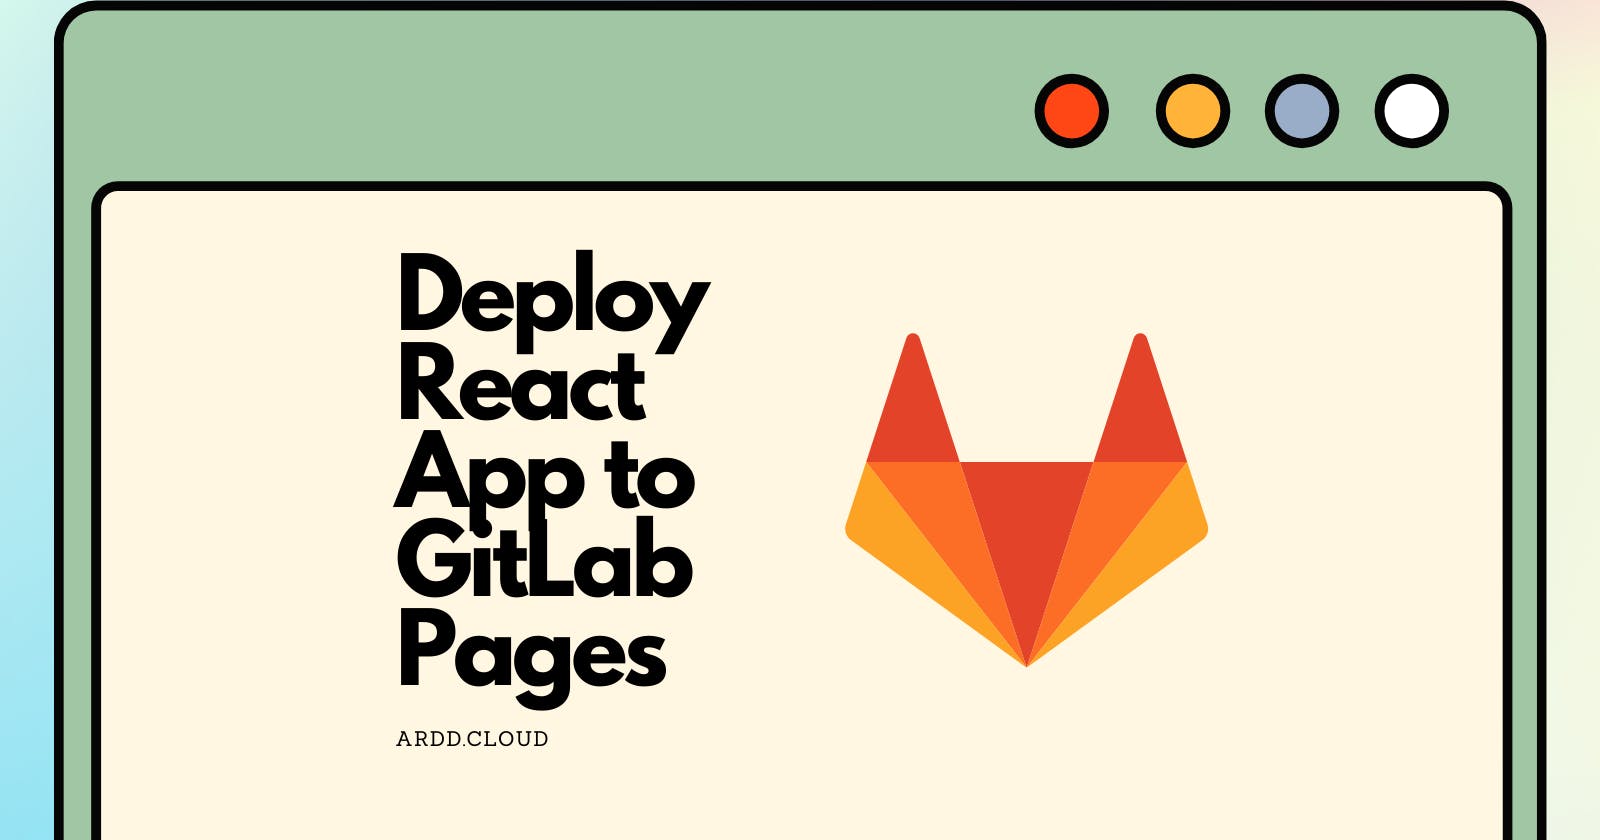 Deploy React App to GitLab Pages